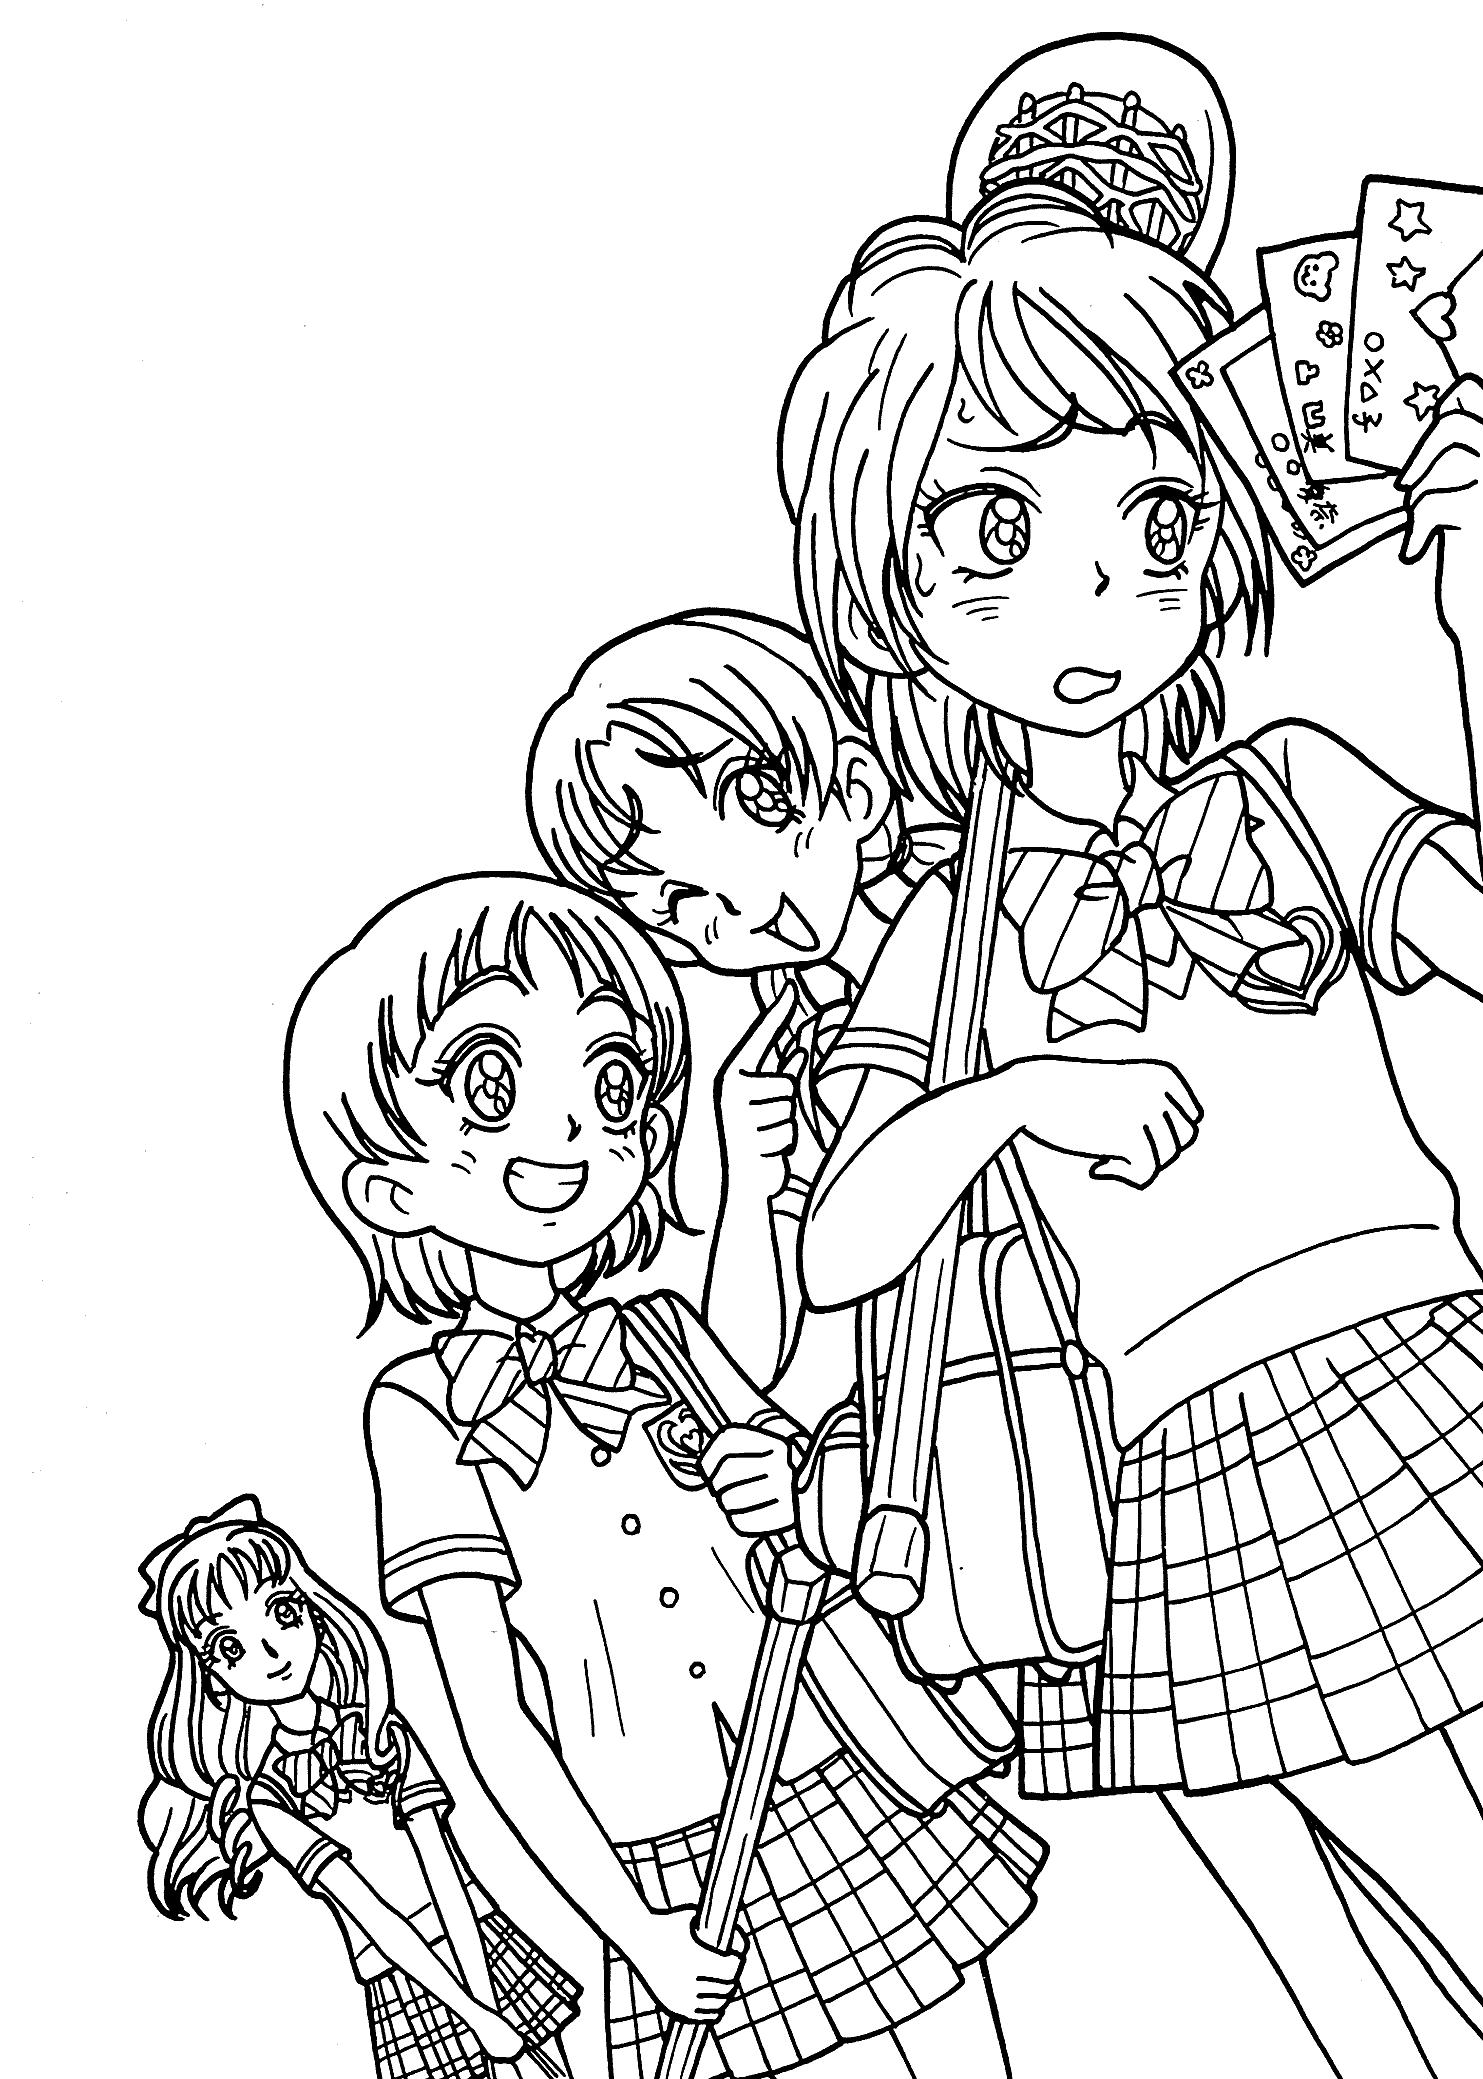 Anime Baby Girl Coloring Pages - Coloring Pages For All Ages